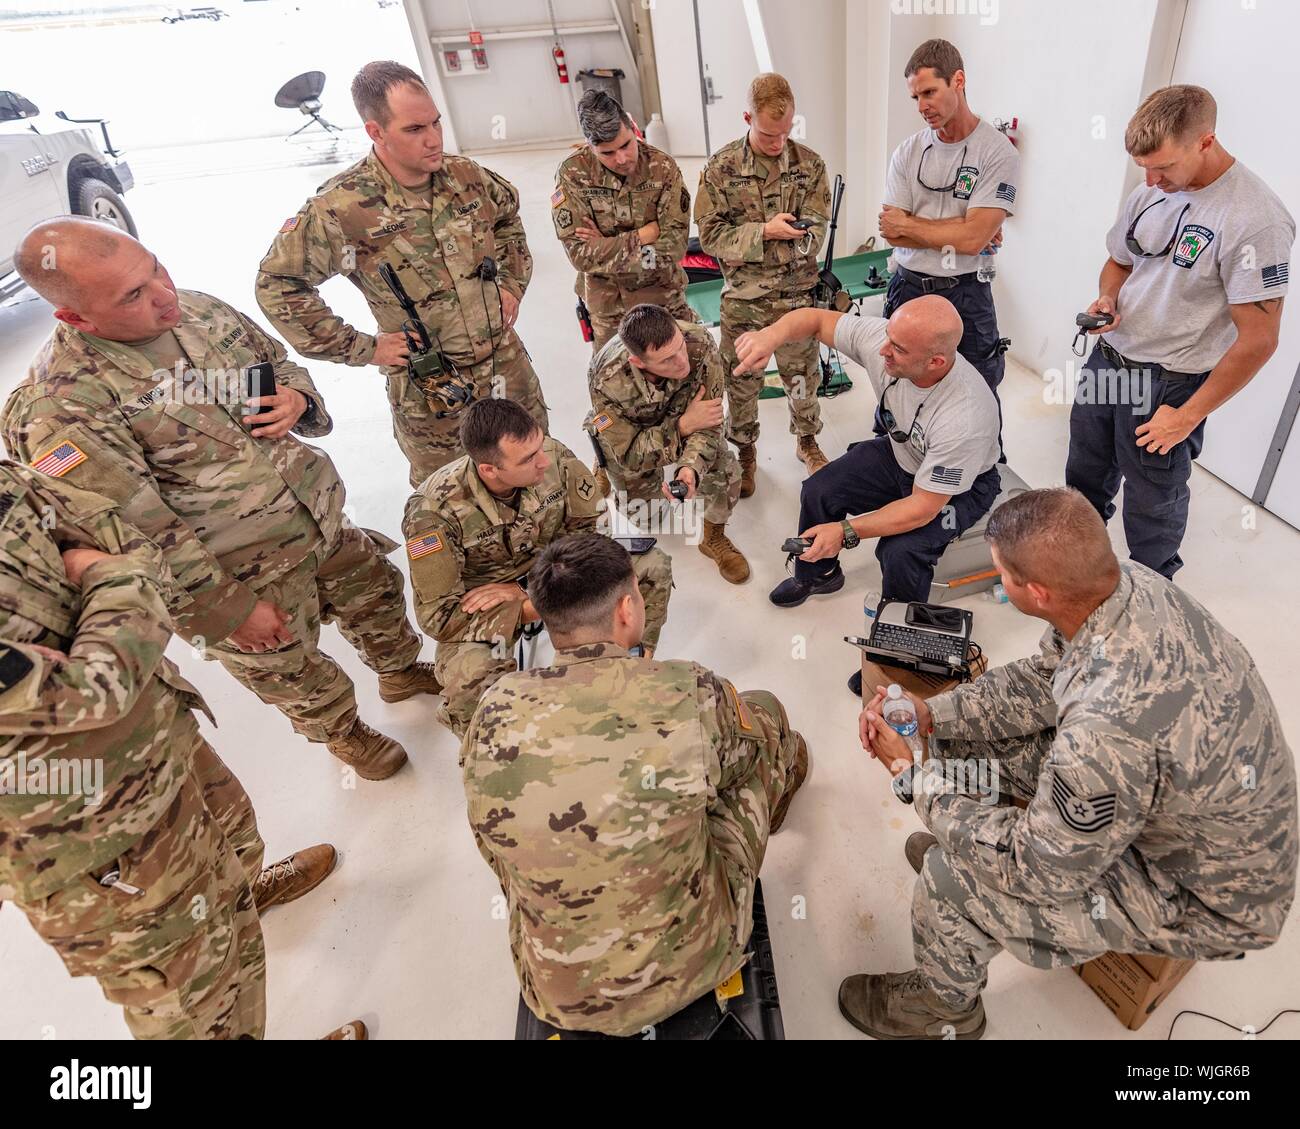 OPA-LOCKA, FLORIDA, FLORIDA (2 September 2019) -- Florida National Guard Soldiers and Airmen, from the CBRN Enhanced Response Force Package (CERFP), load equipment and prepare for potential missions responding to Hurricane Dorian, 2019. (Photo by Ching Oettel). () Stock Photo